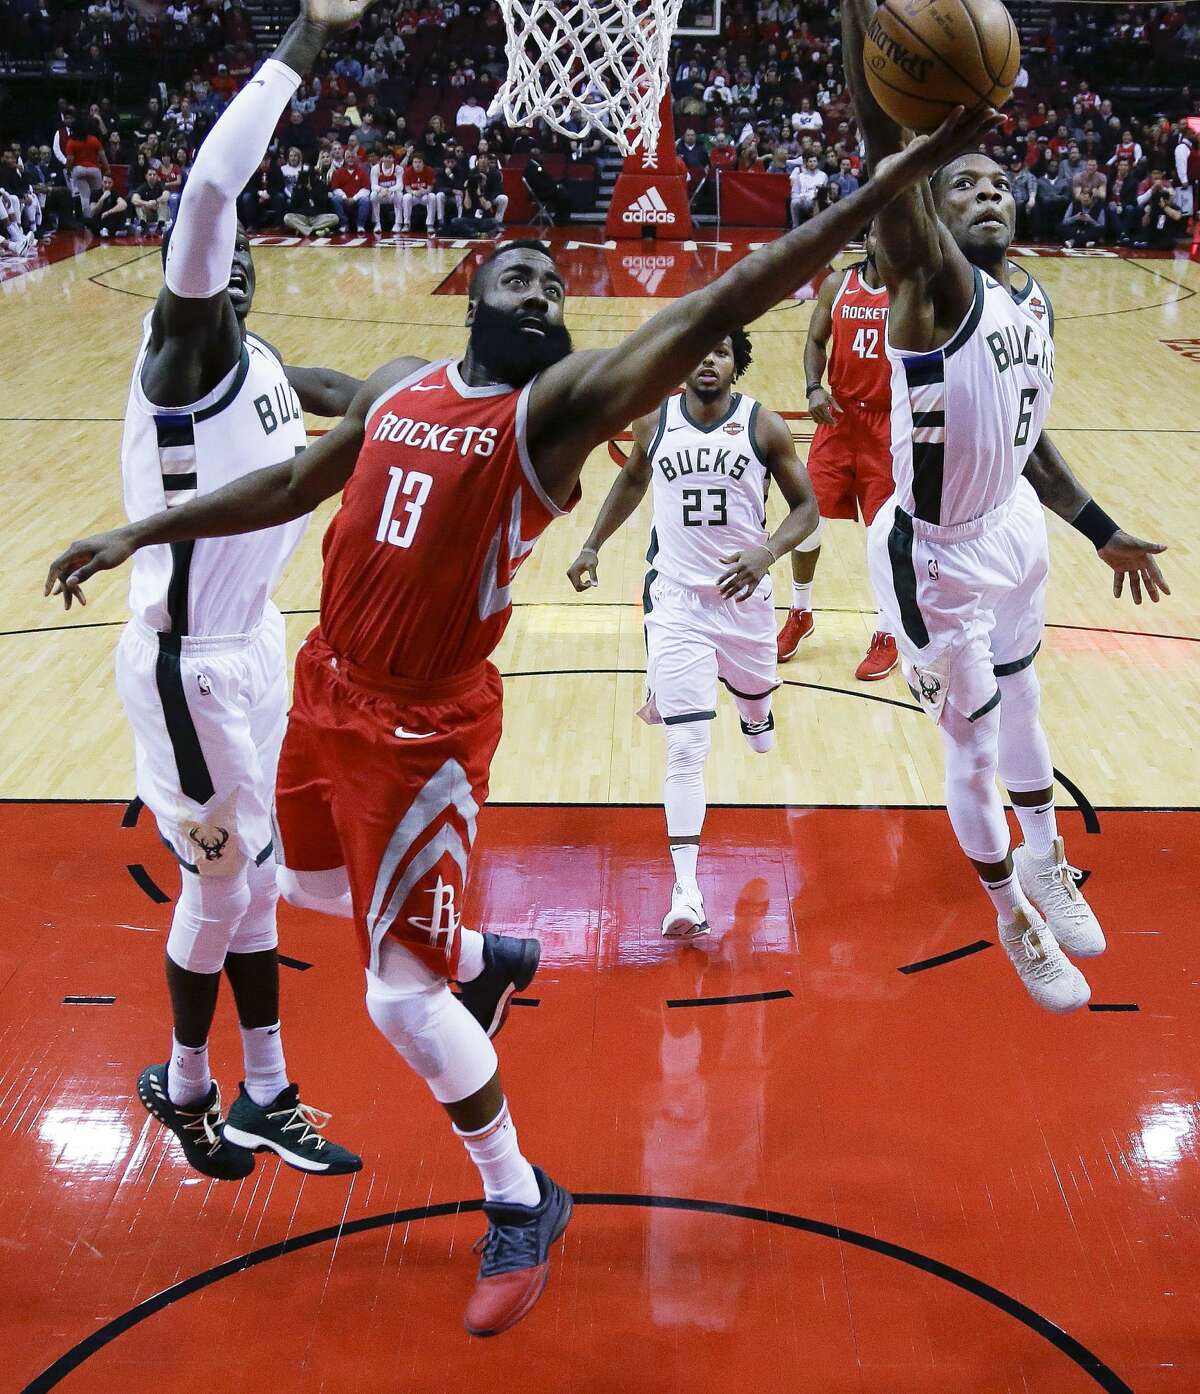 Houston Rockets guard James Harden (13) drives between Milwaukee Bucks center Thon Maker, left, and guard Eric Bledsoe during the first half of an NBA basketball game, Saturday, Dec. 16, 2017, in Houston. (AP Photo/Eric Christian Smith)